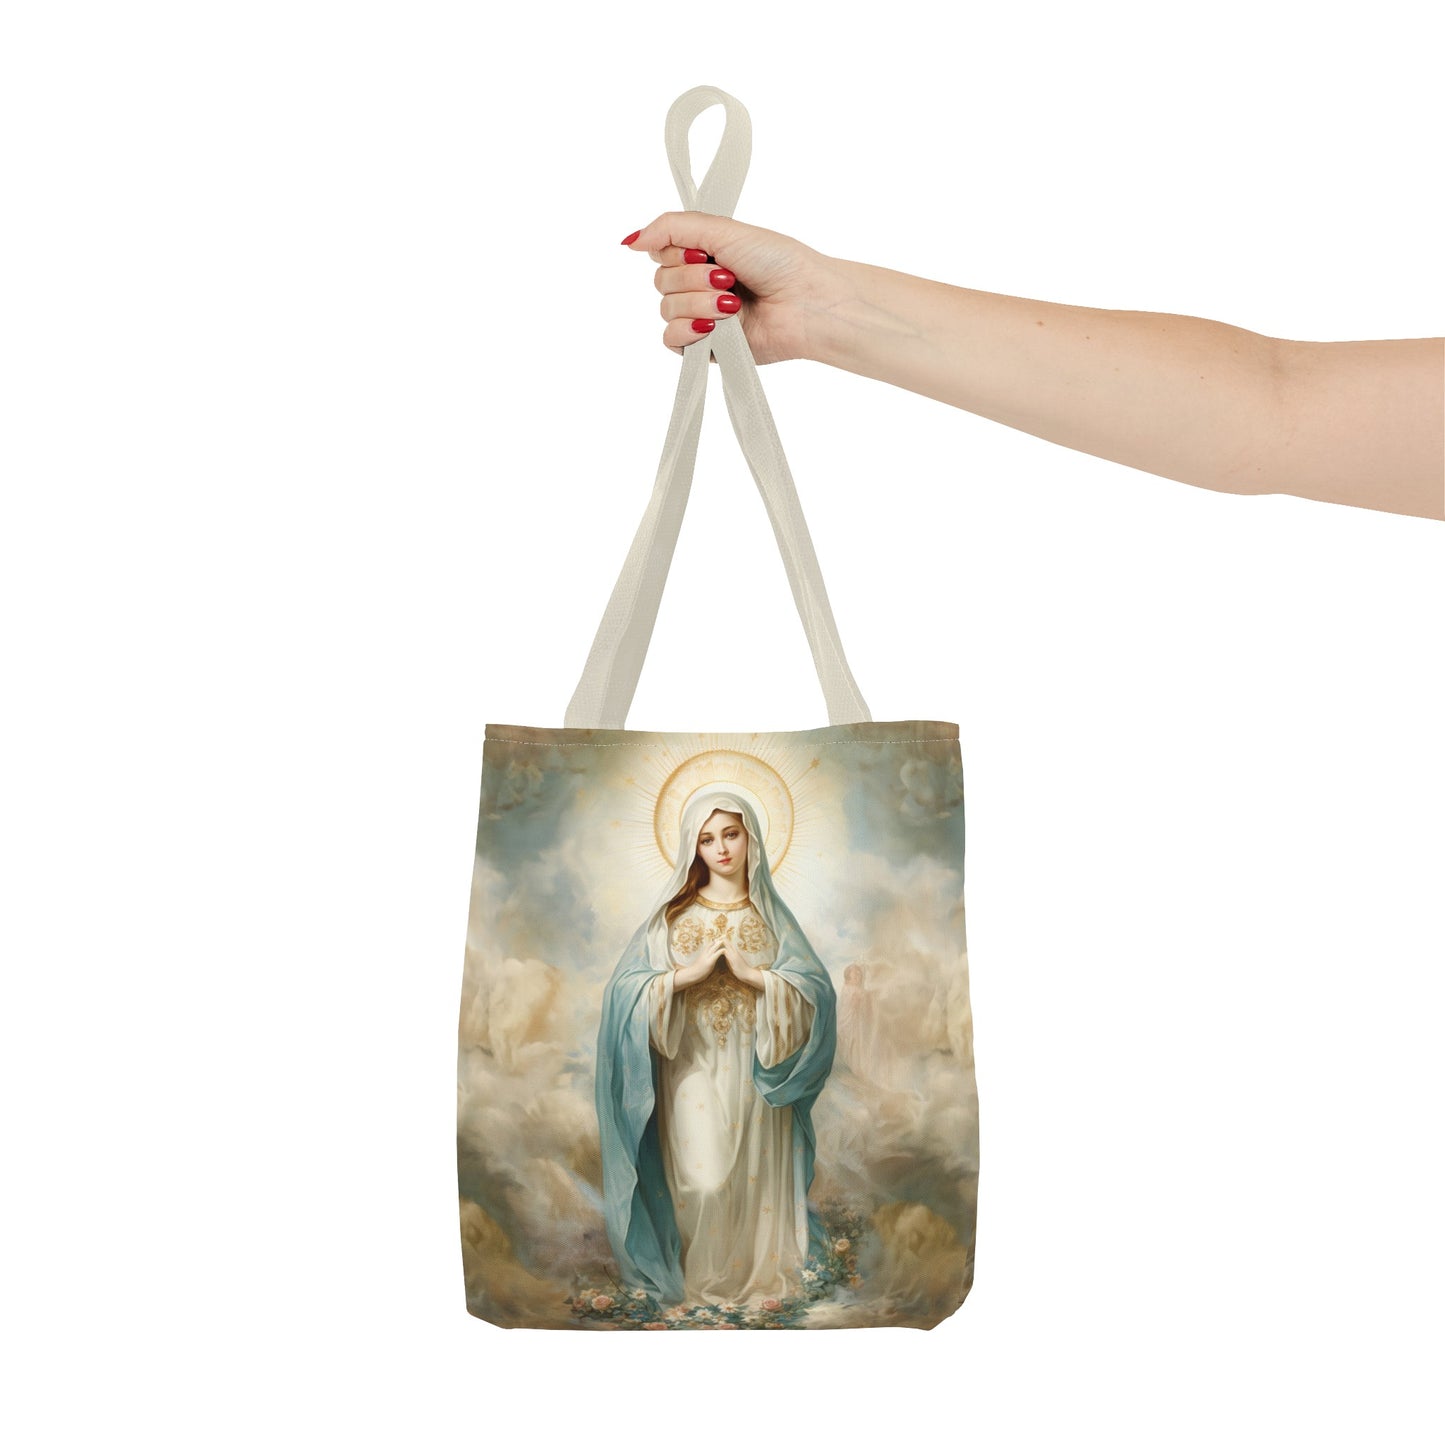 Immaculate Conception Tote Shoulder Bag, Religious gift Women, Church Bag, Queen of Heaven, mothers Day Gift, Picnic Bag